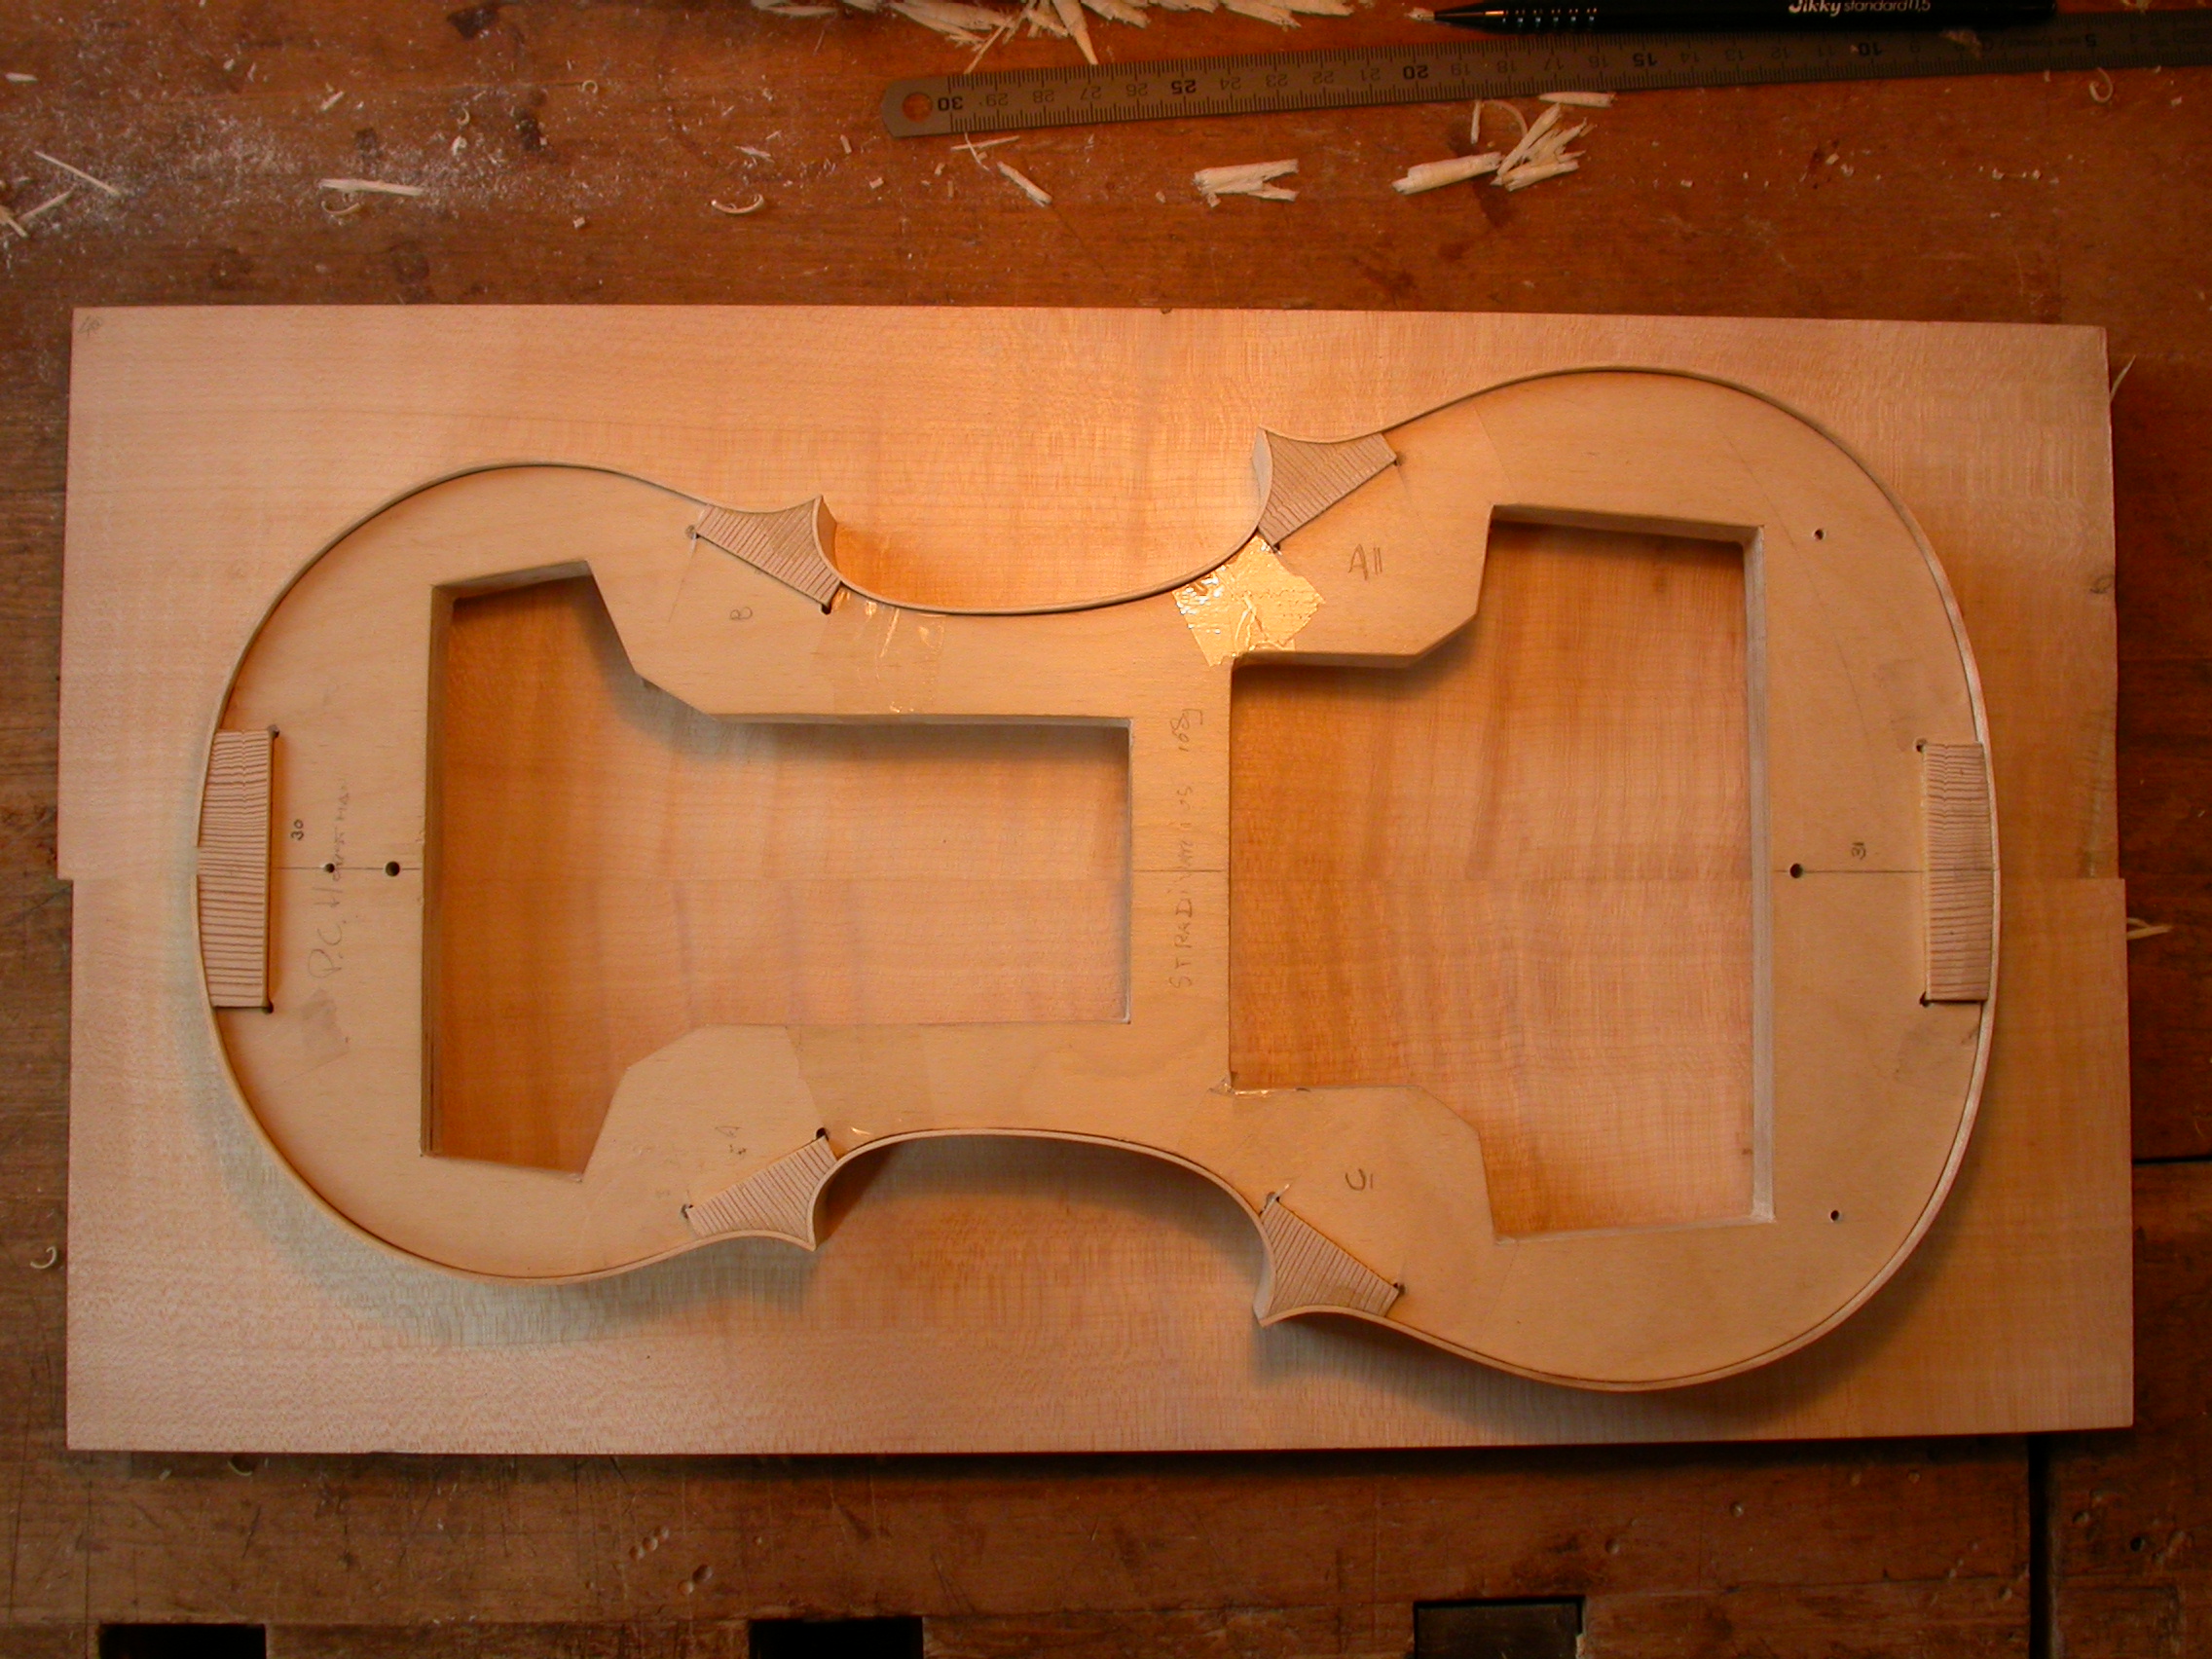 Paul violin wood craft in the making under construction instrument